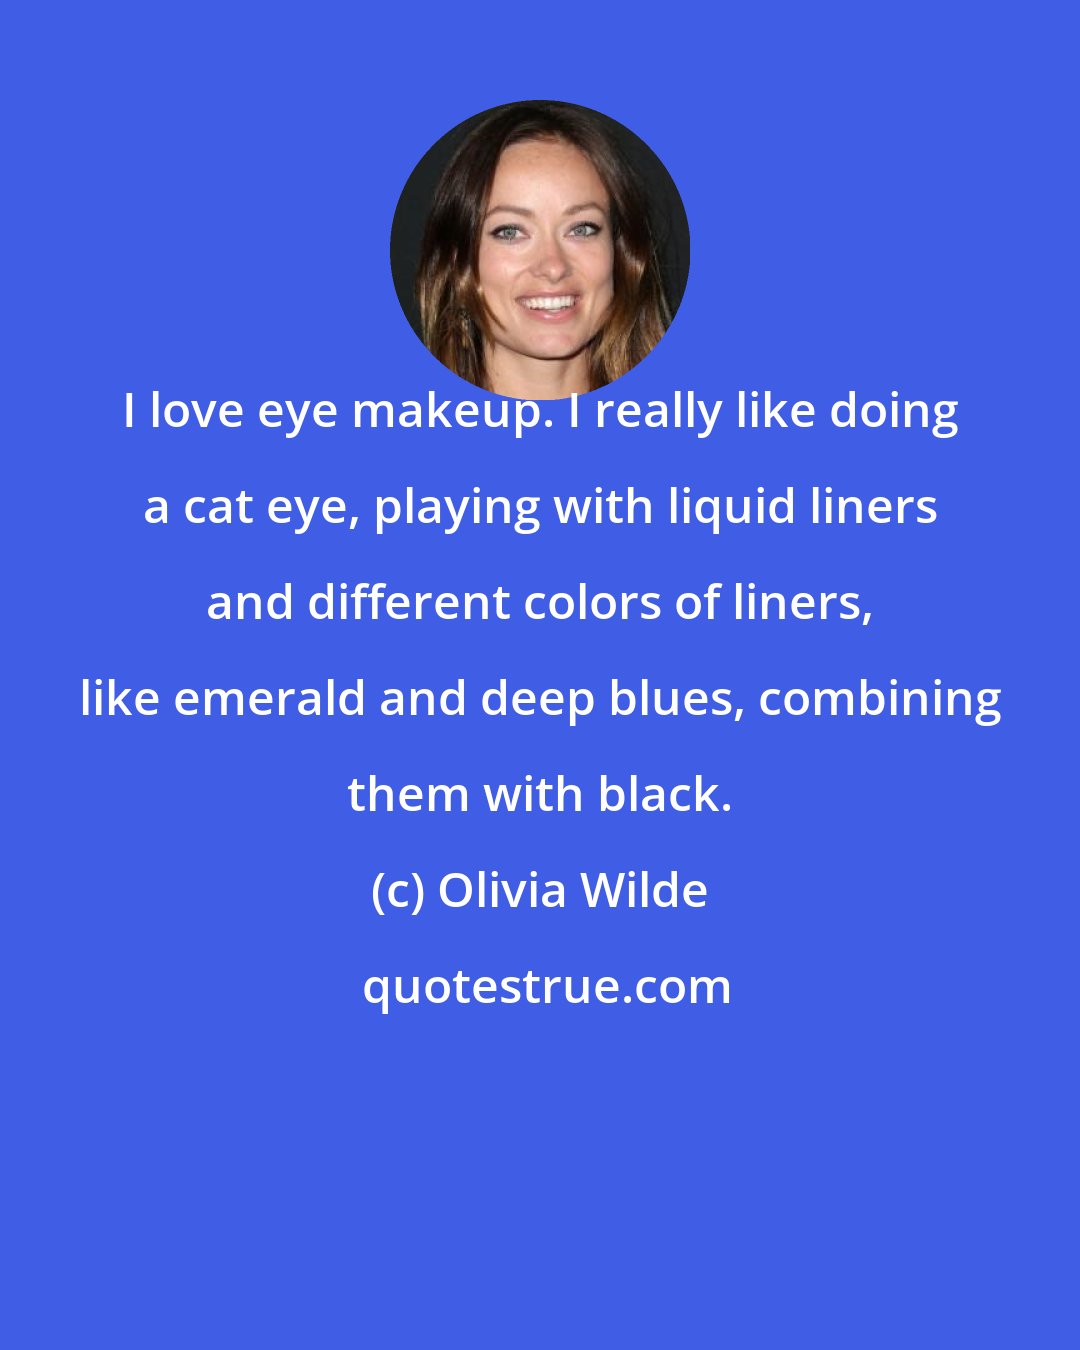 Olivia Wilde: I love eye makeup. I really like doing a cat eye, playing with liquid liners and different colors of liners, like emerald and deep blues, combining them with black.